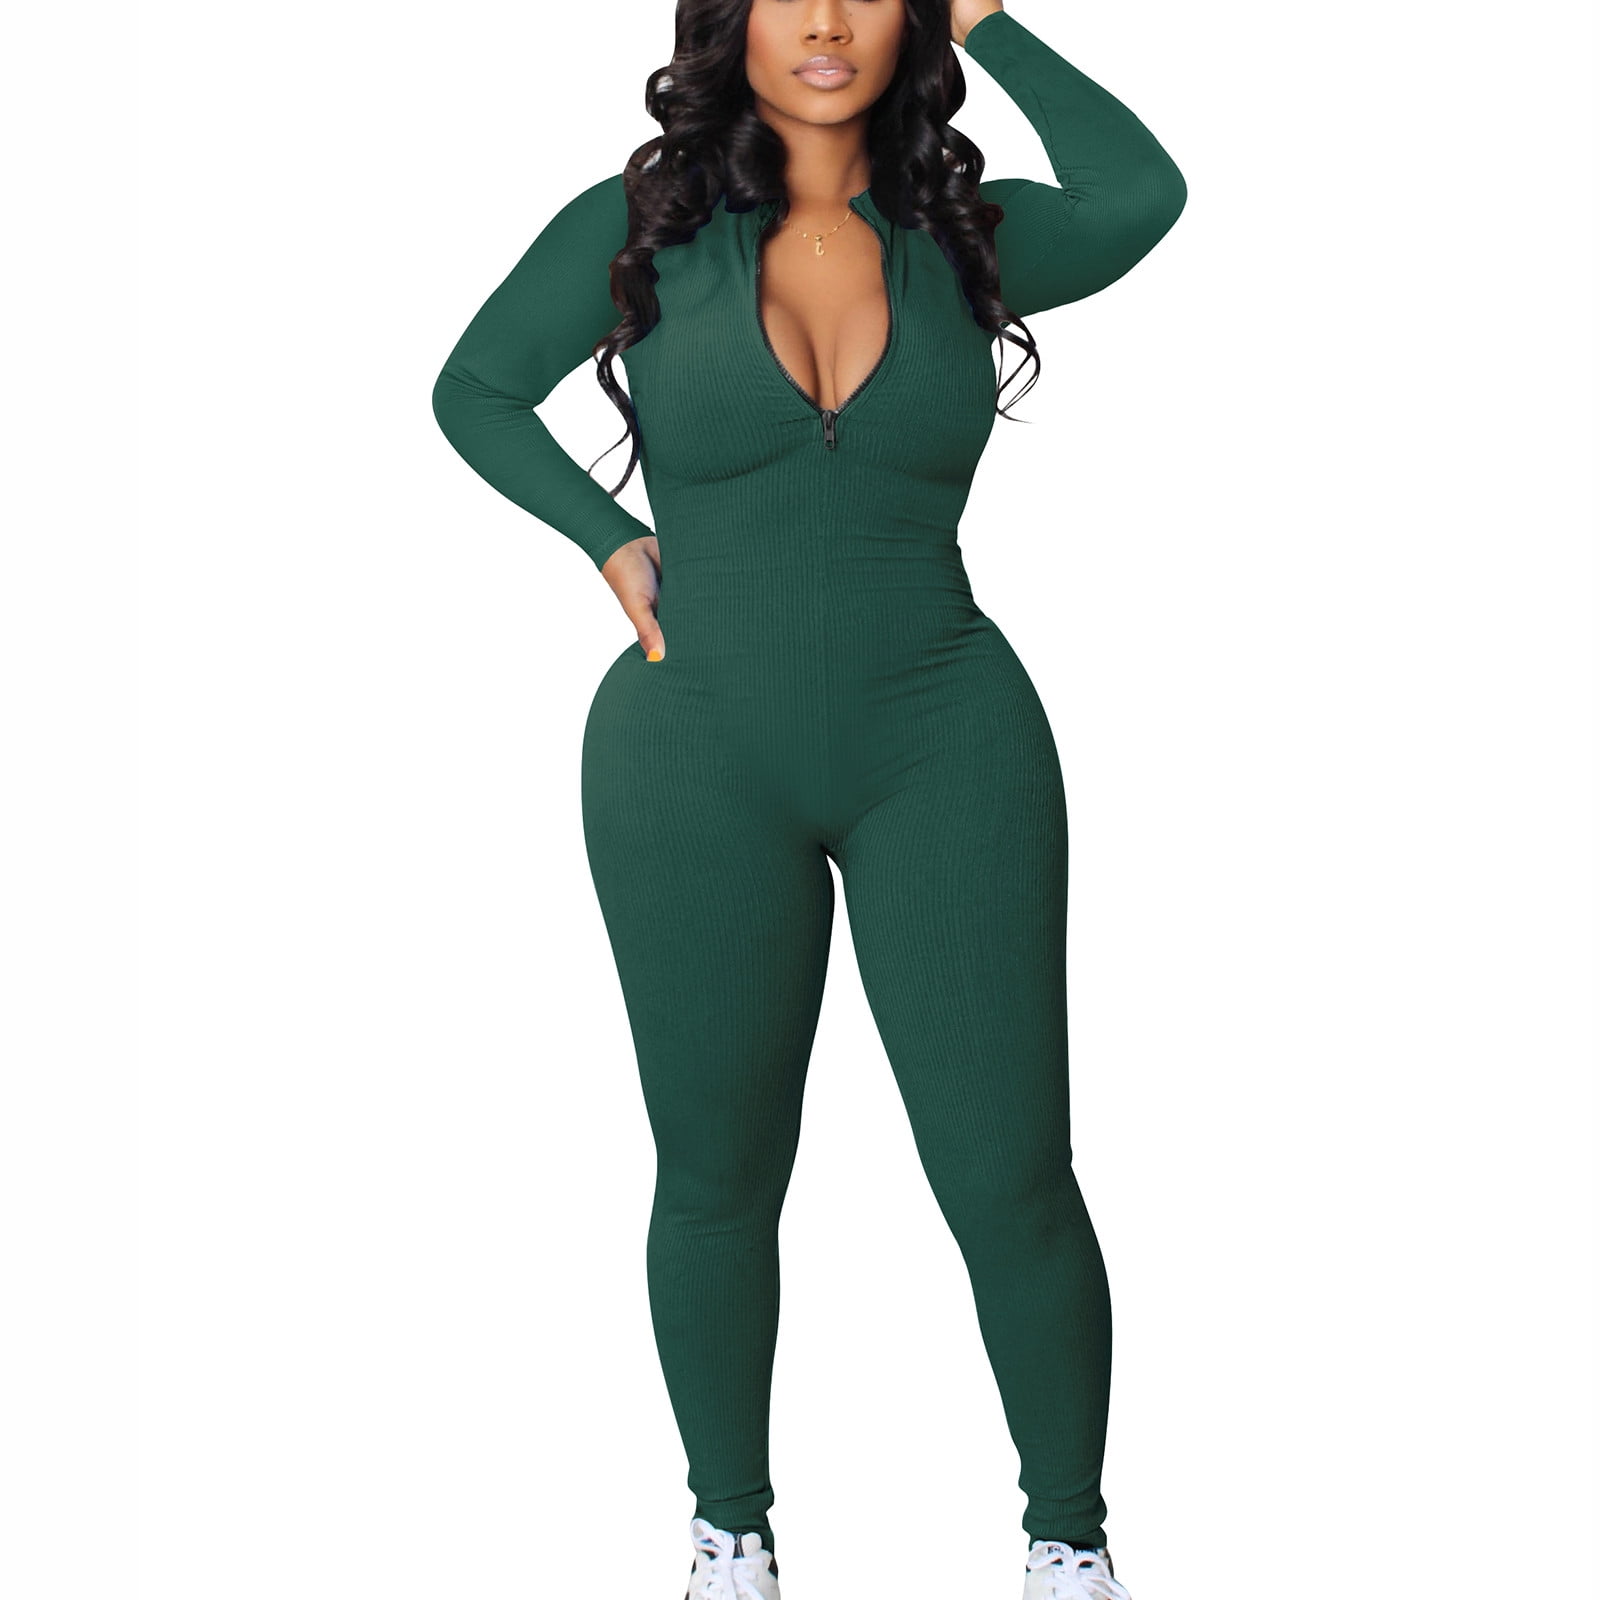 Women Bodysuit Romper Jumpsuit shorts Long Sleeves Casual Sexy